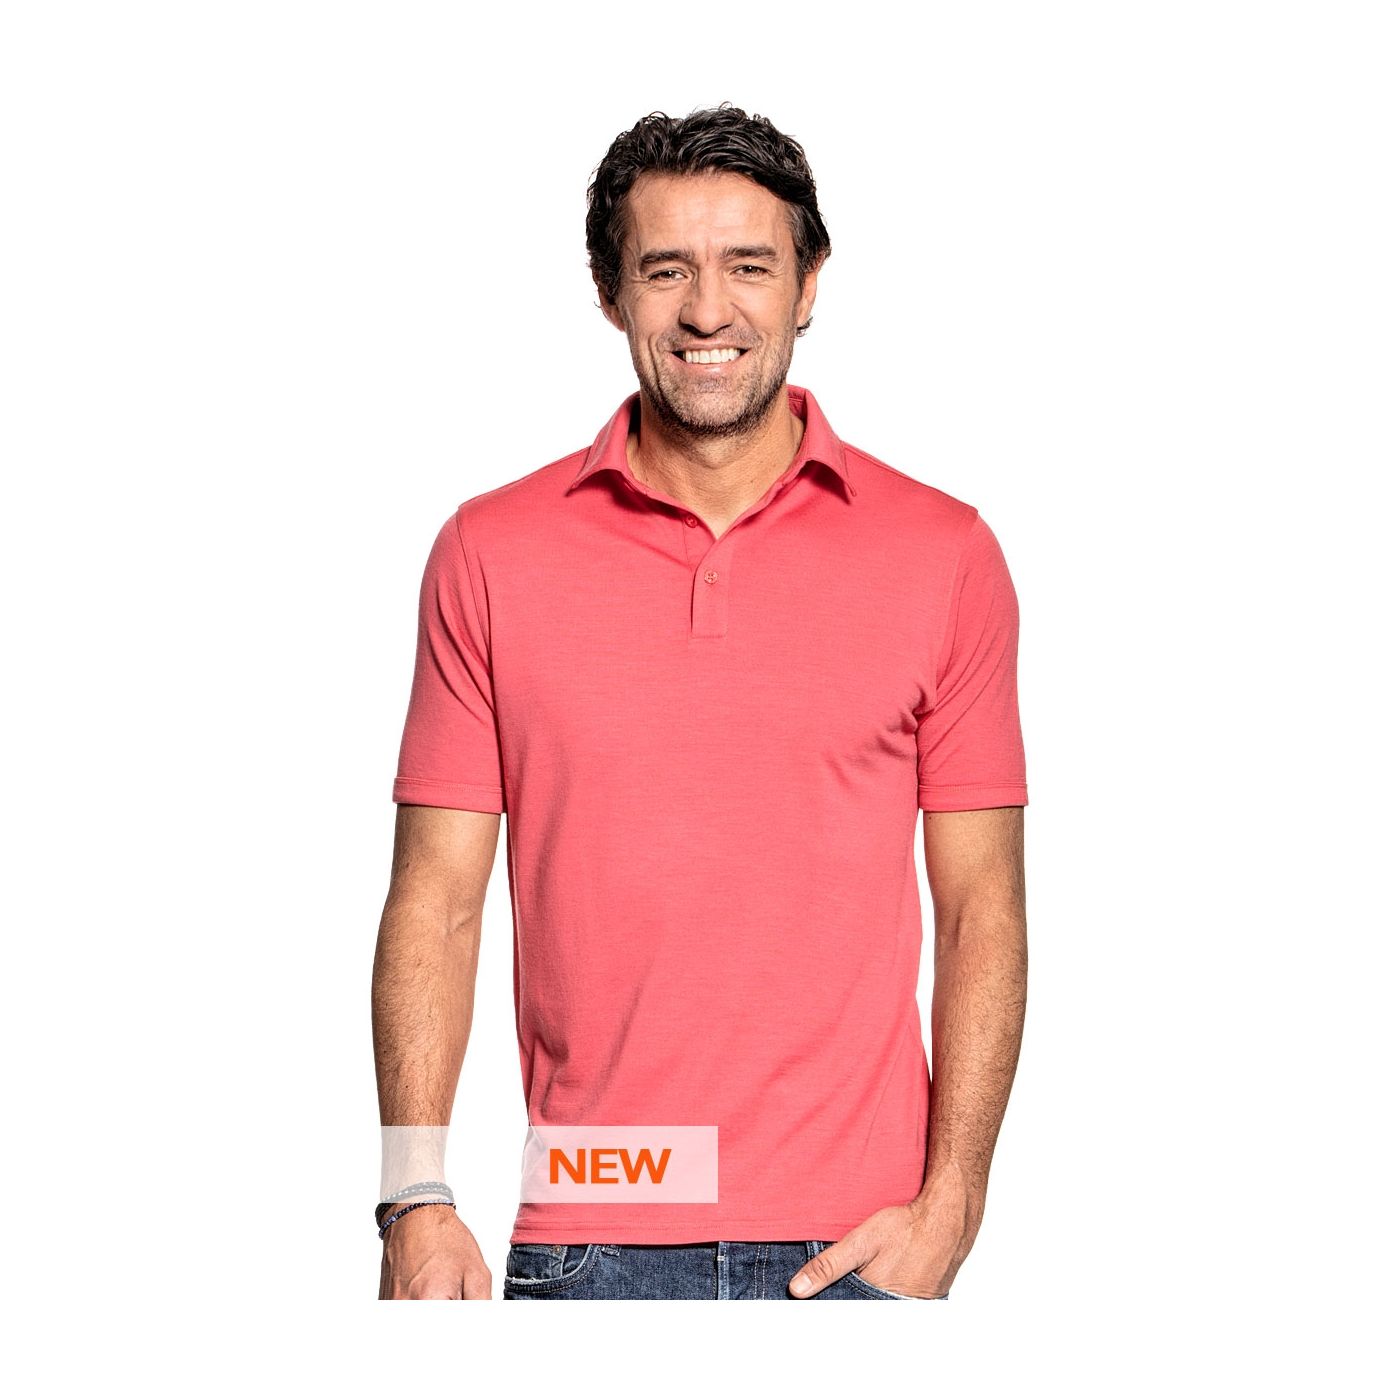 Polo shirt for men made of Merino wool in Pink